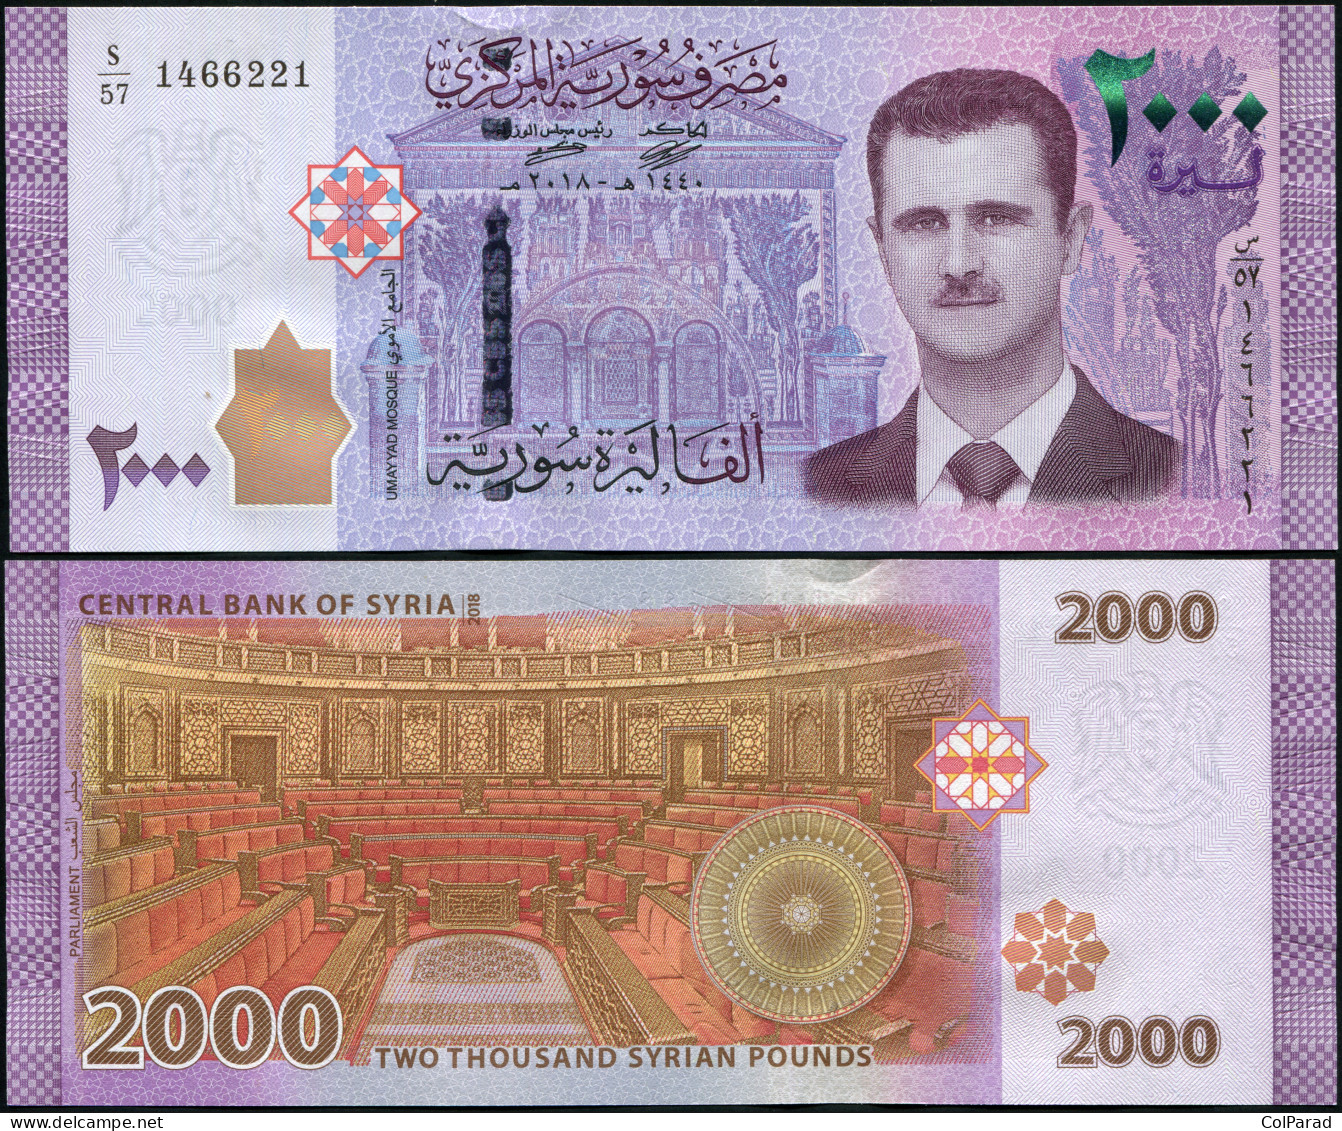 SYRIA 2000 SYRIAN POUNDS - 2018 - Paper Unc - P.117c Banknote - Syrie